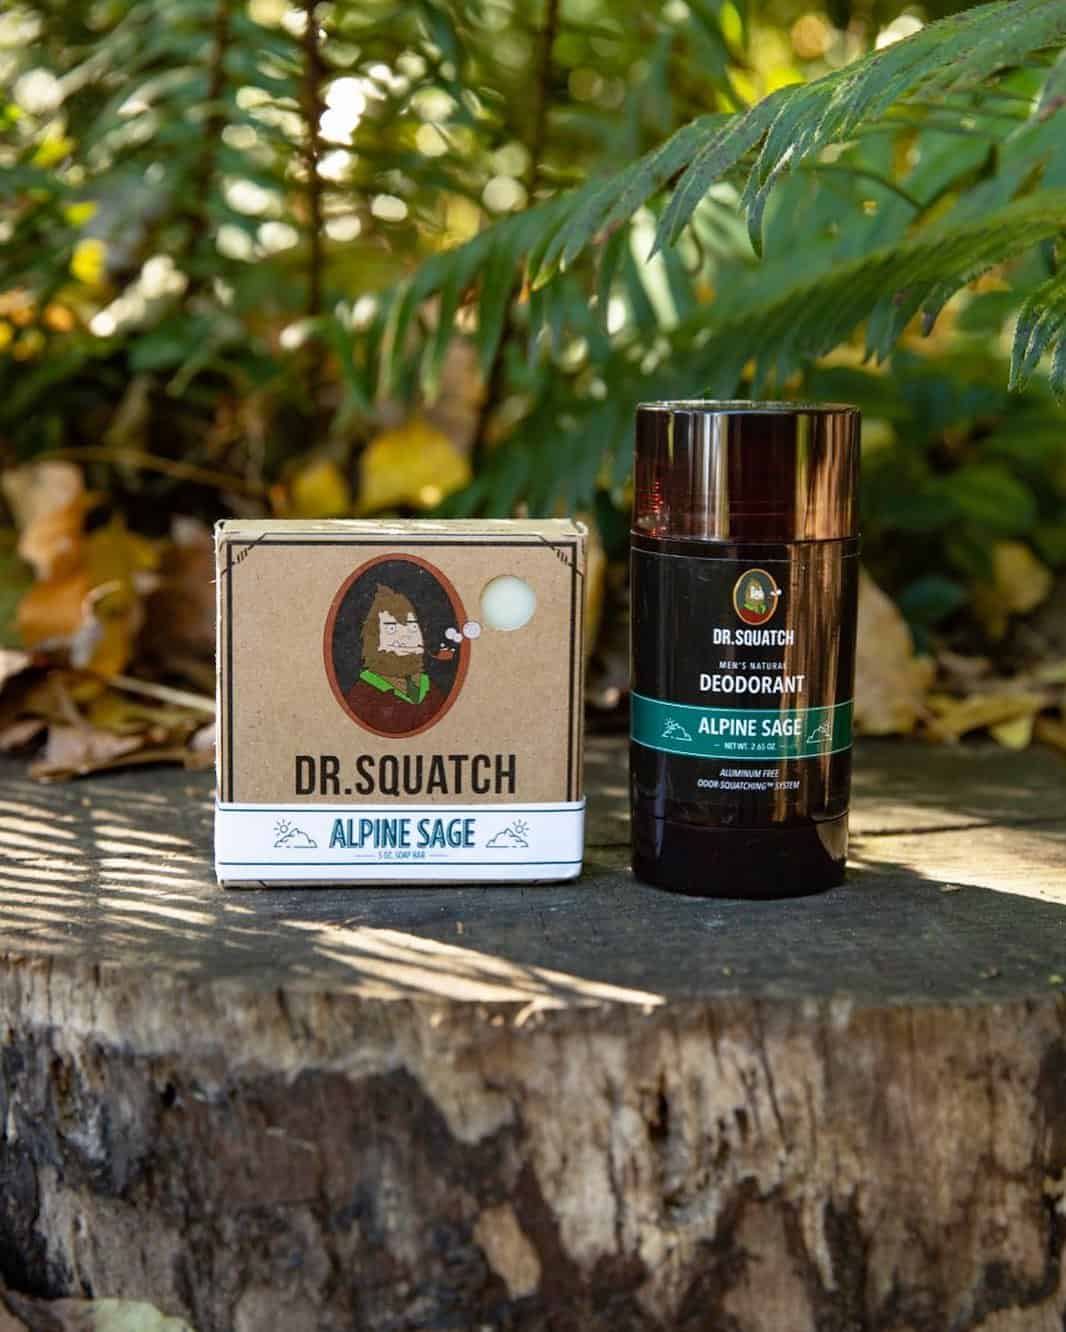 alpine sage soap and deodorant from dr squatch